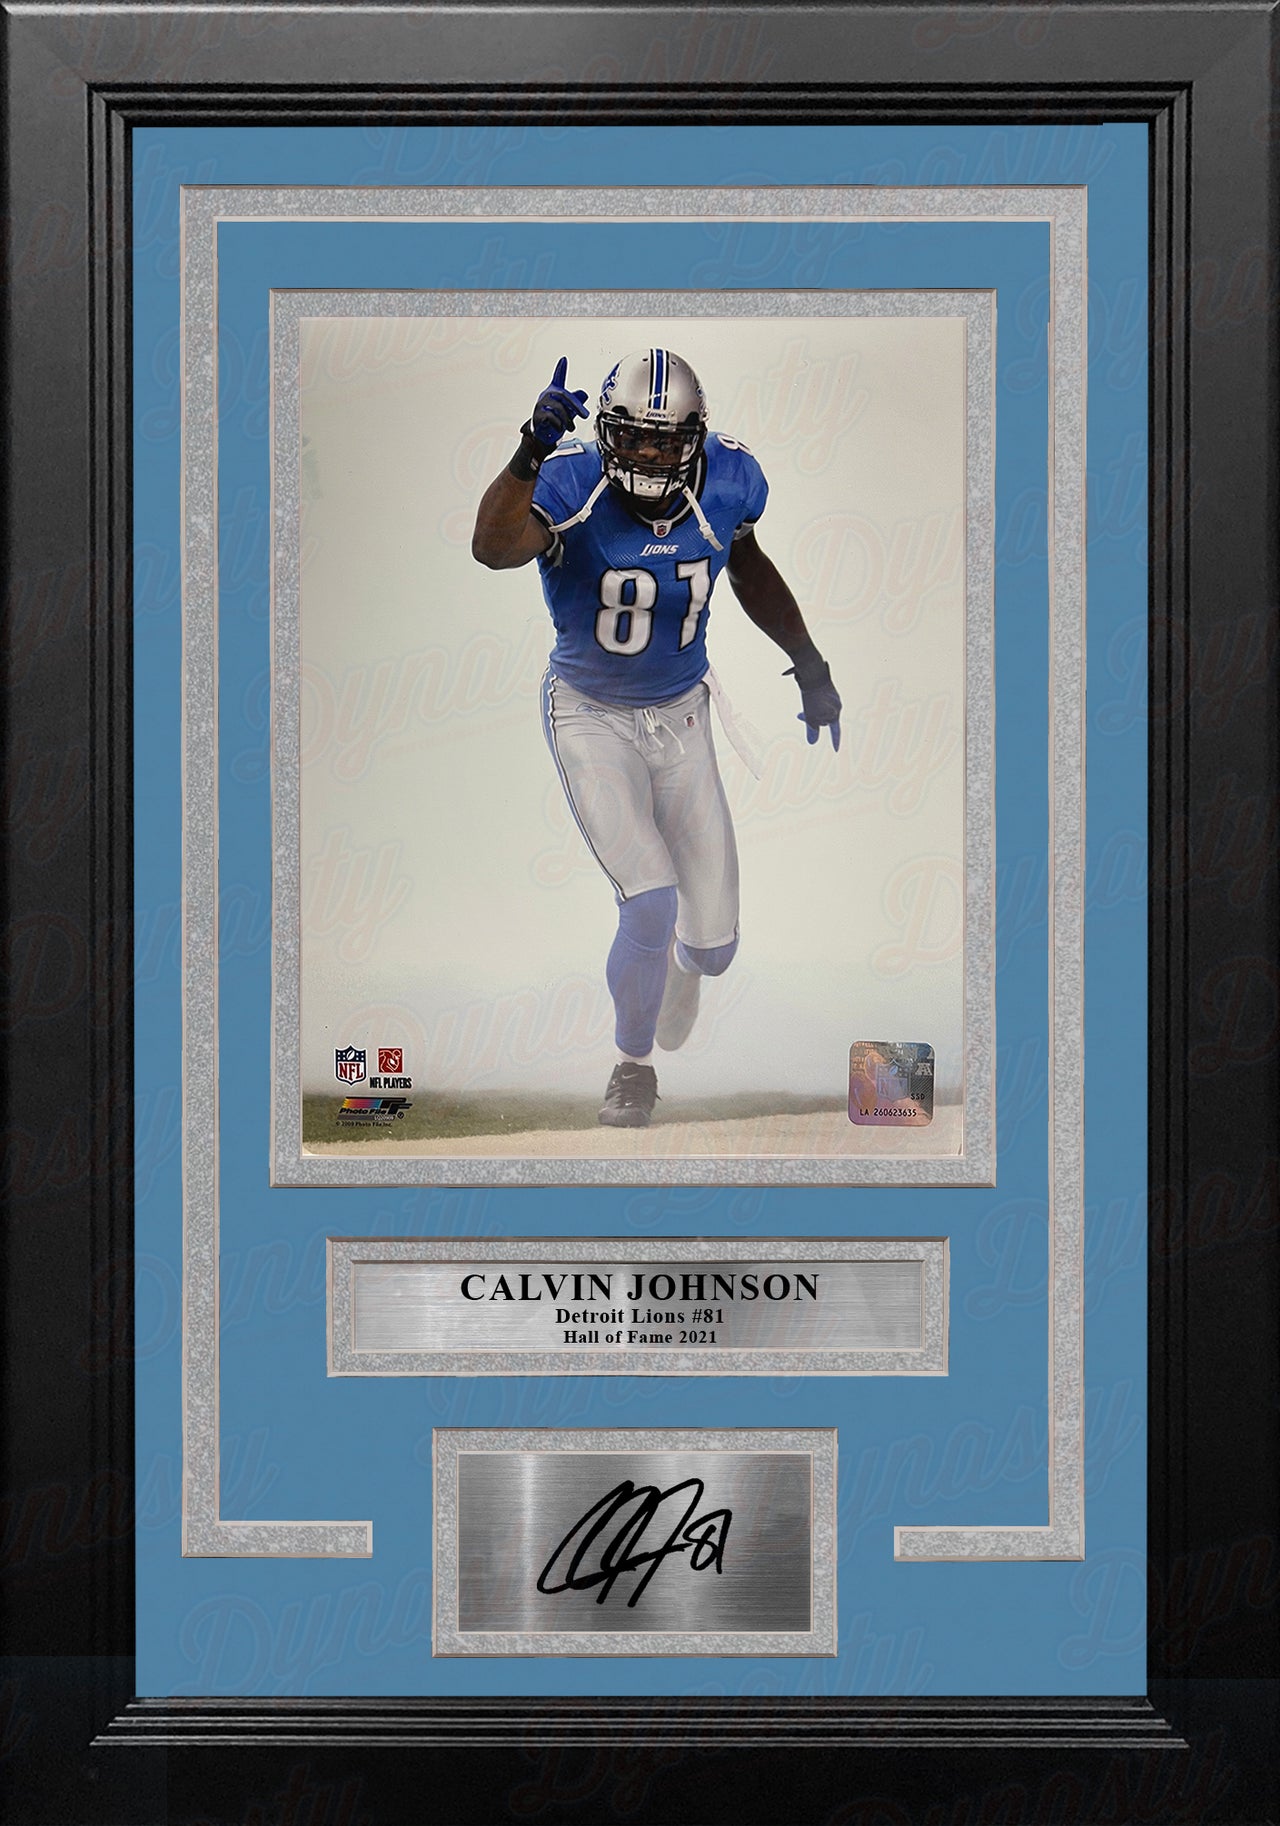 Calvin Johnson in the Smoke Detroit Lions 8" x 10" Framed Football Photo with Engraved Autograph